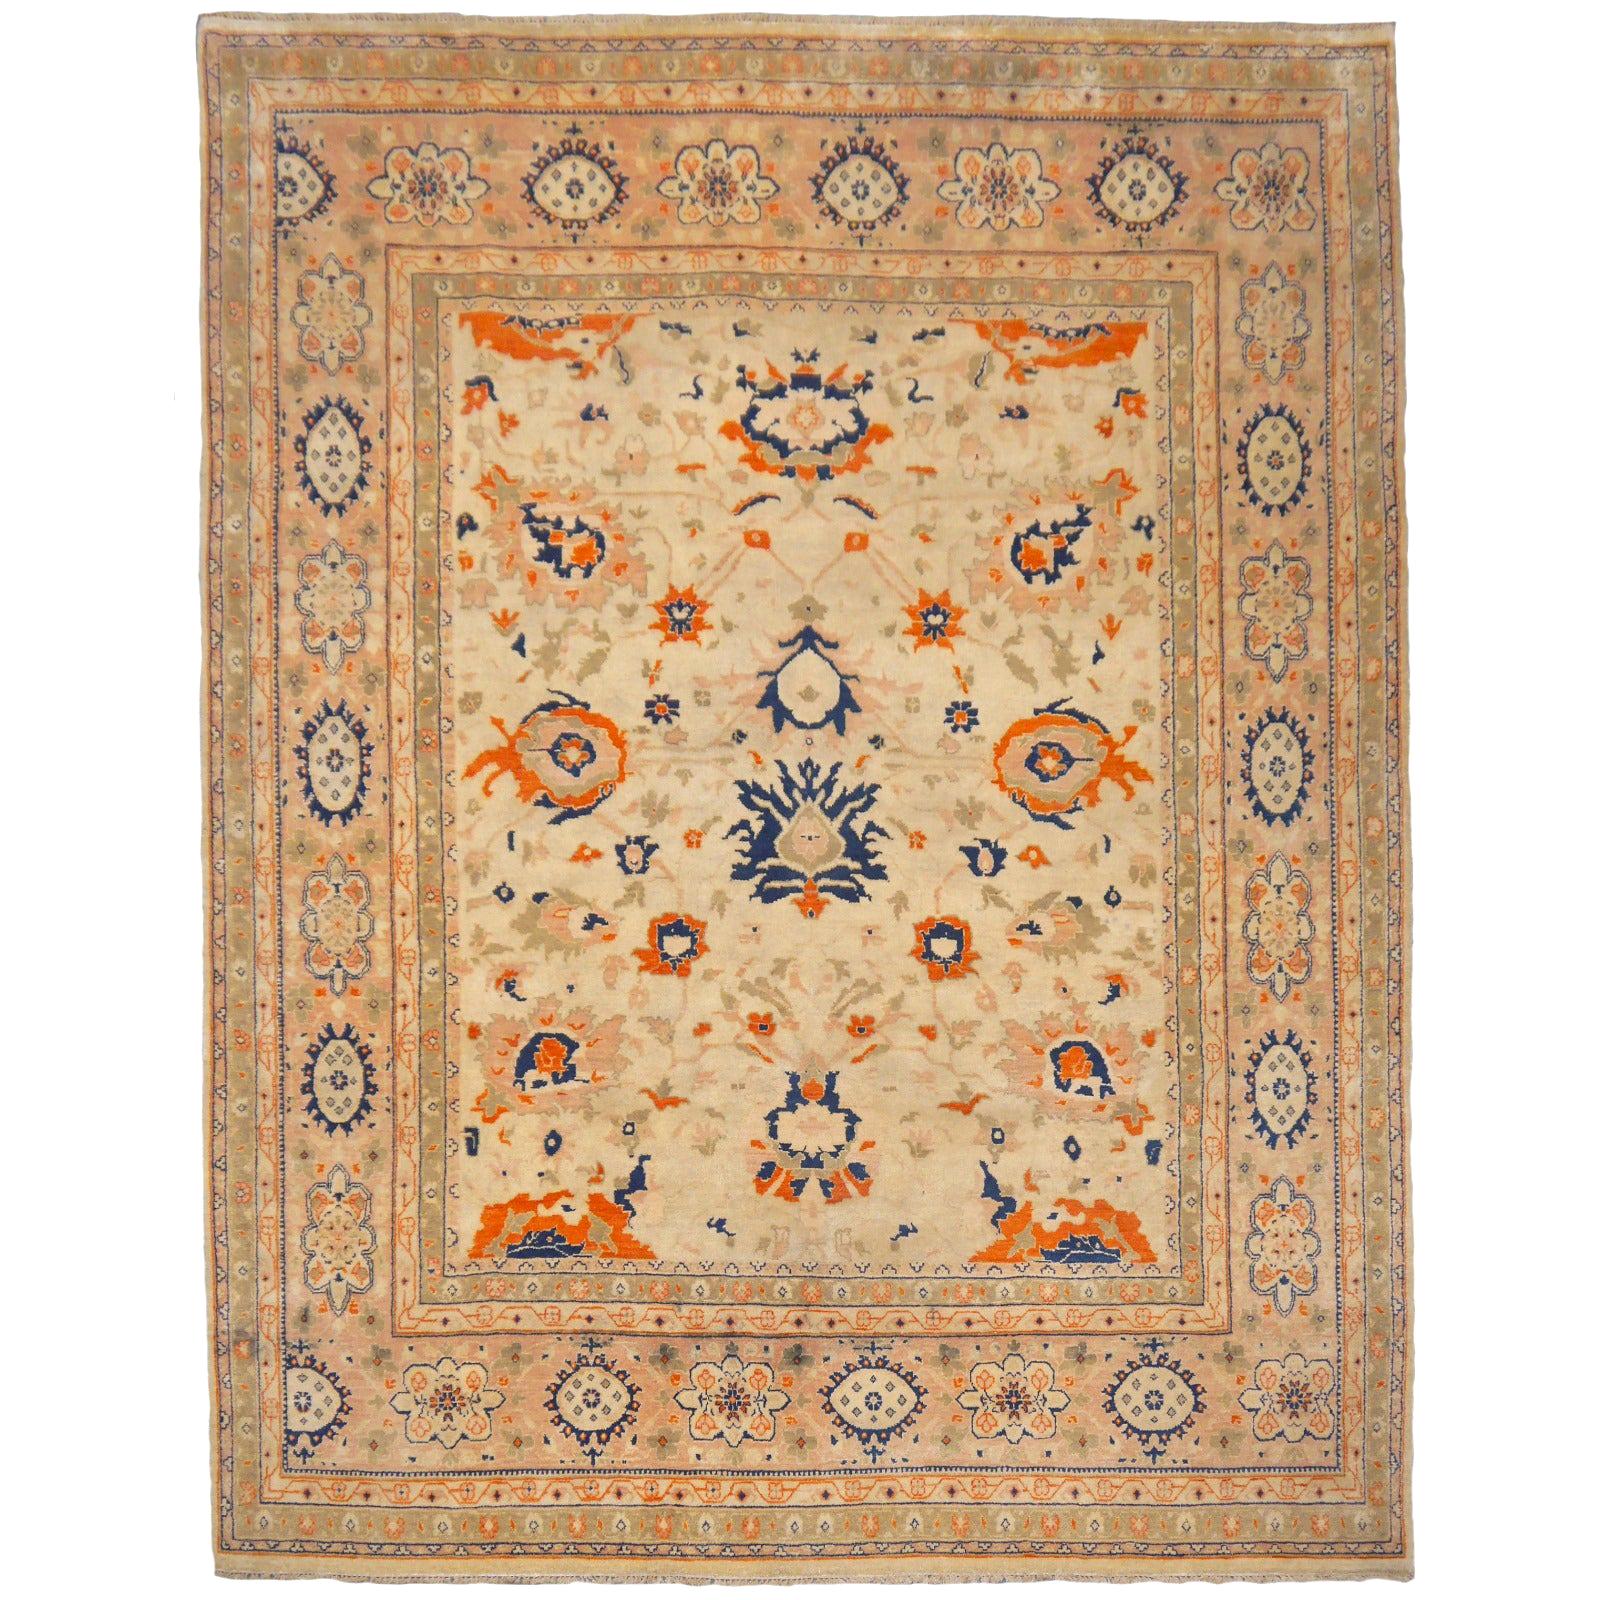 8 x 10 ft Sultanabad Mahal Design Rug Hand Knotted Wool Pile For Sale